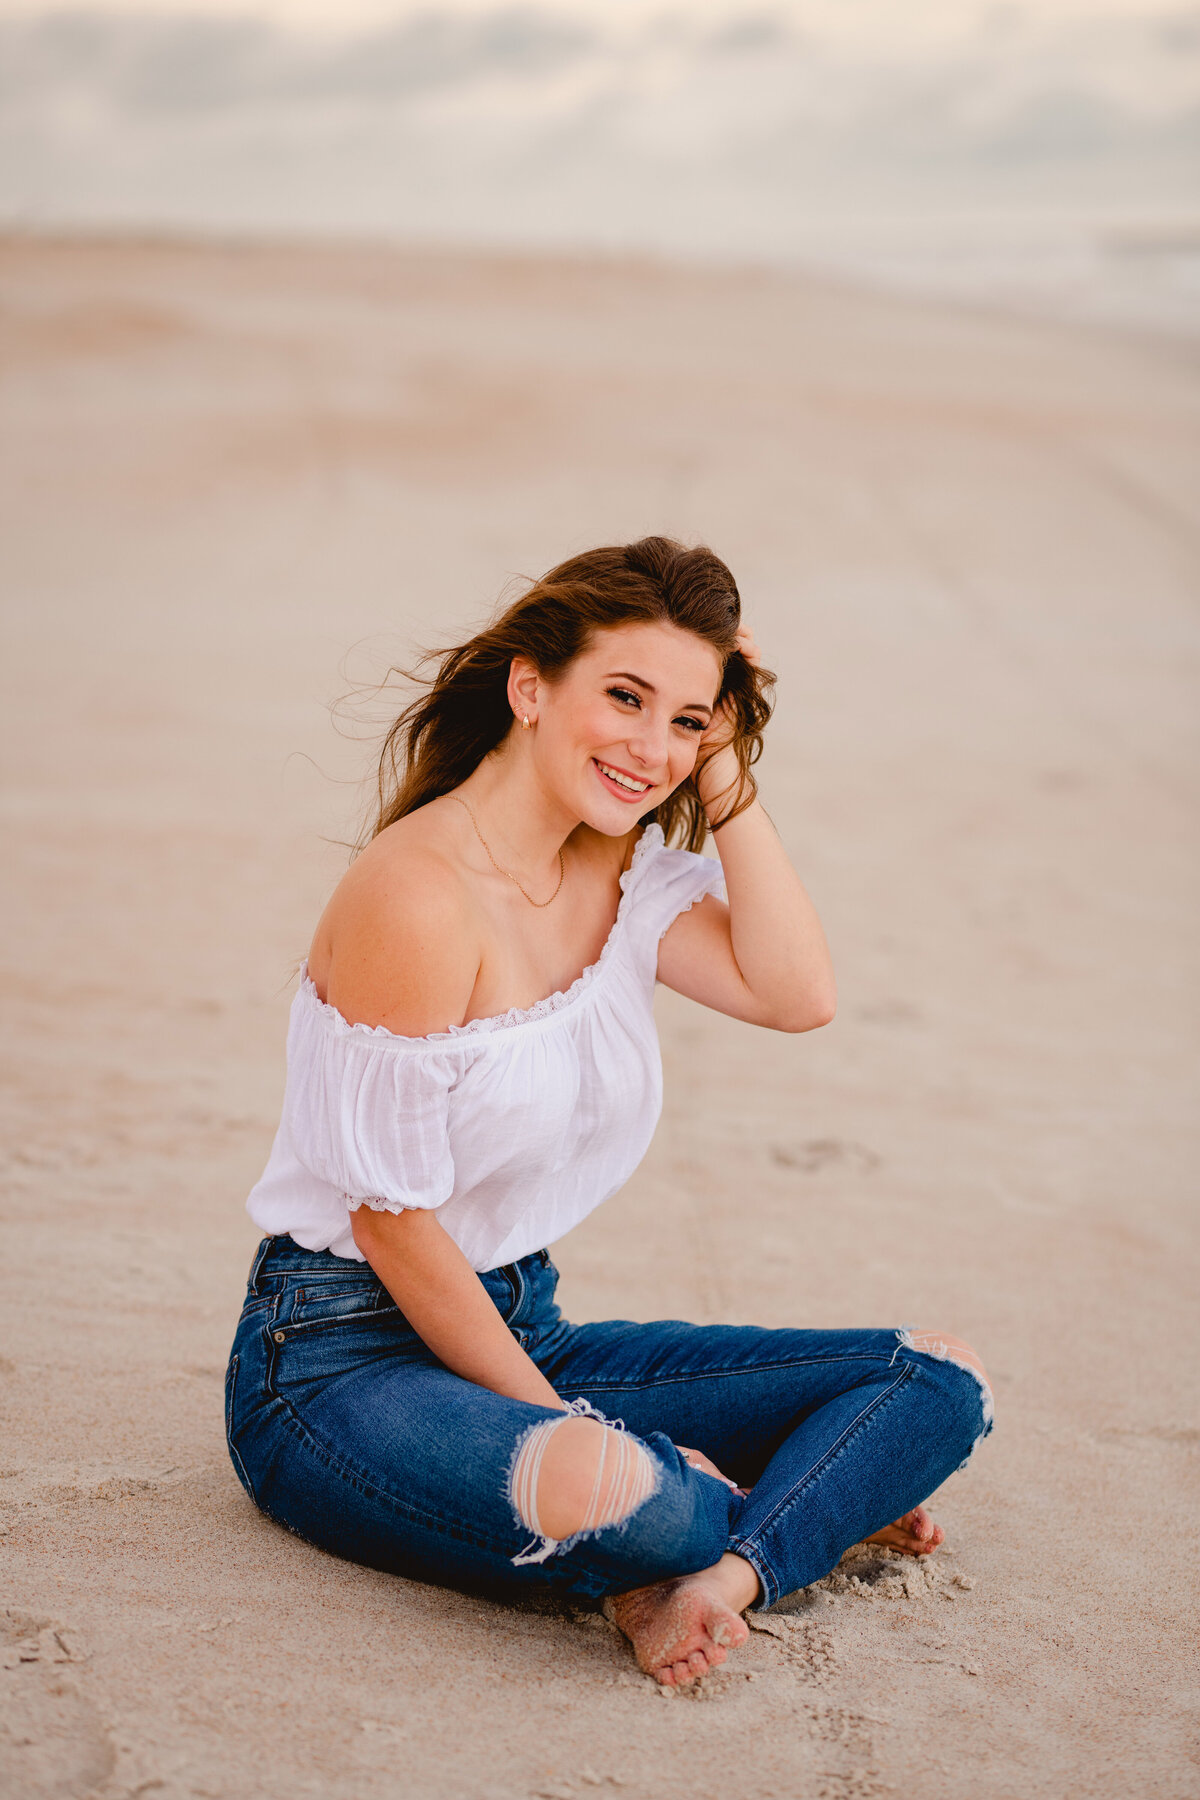 Girl on beach in white top and jeans for senior photography.